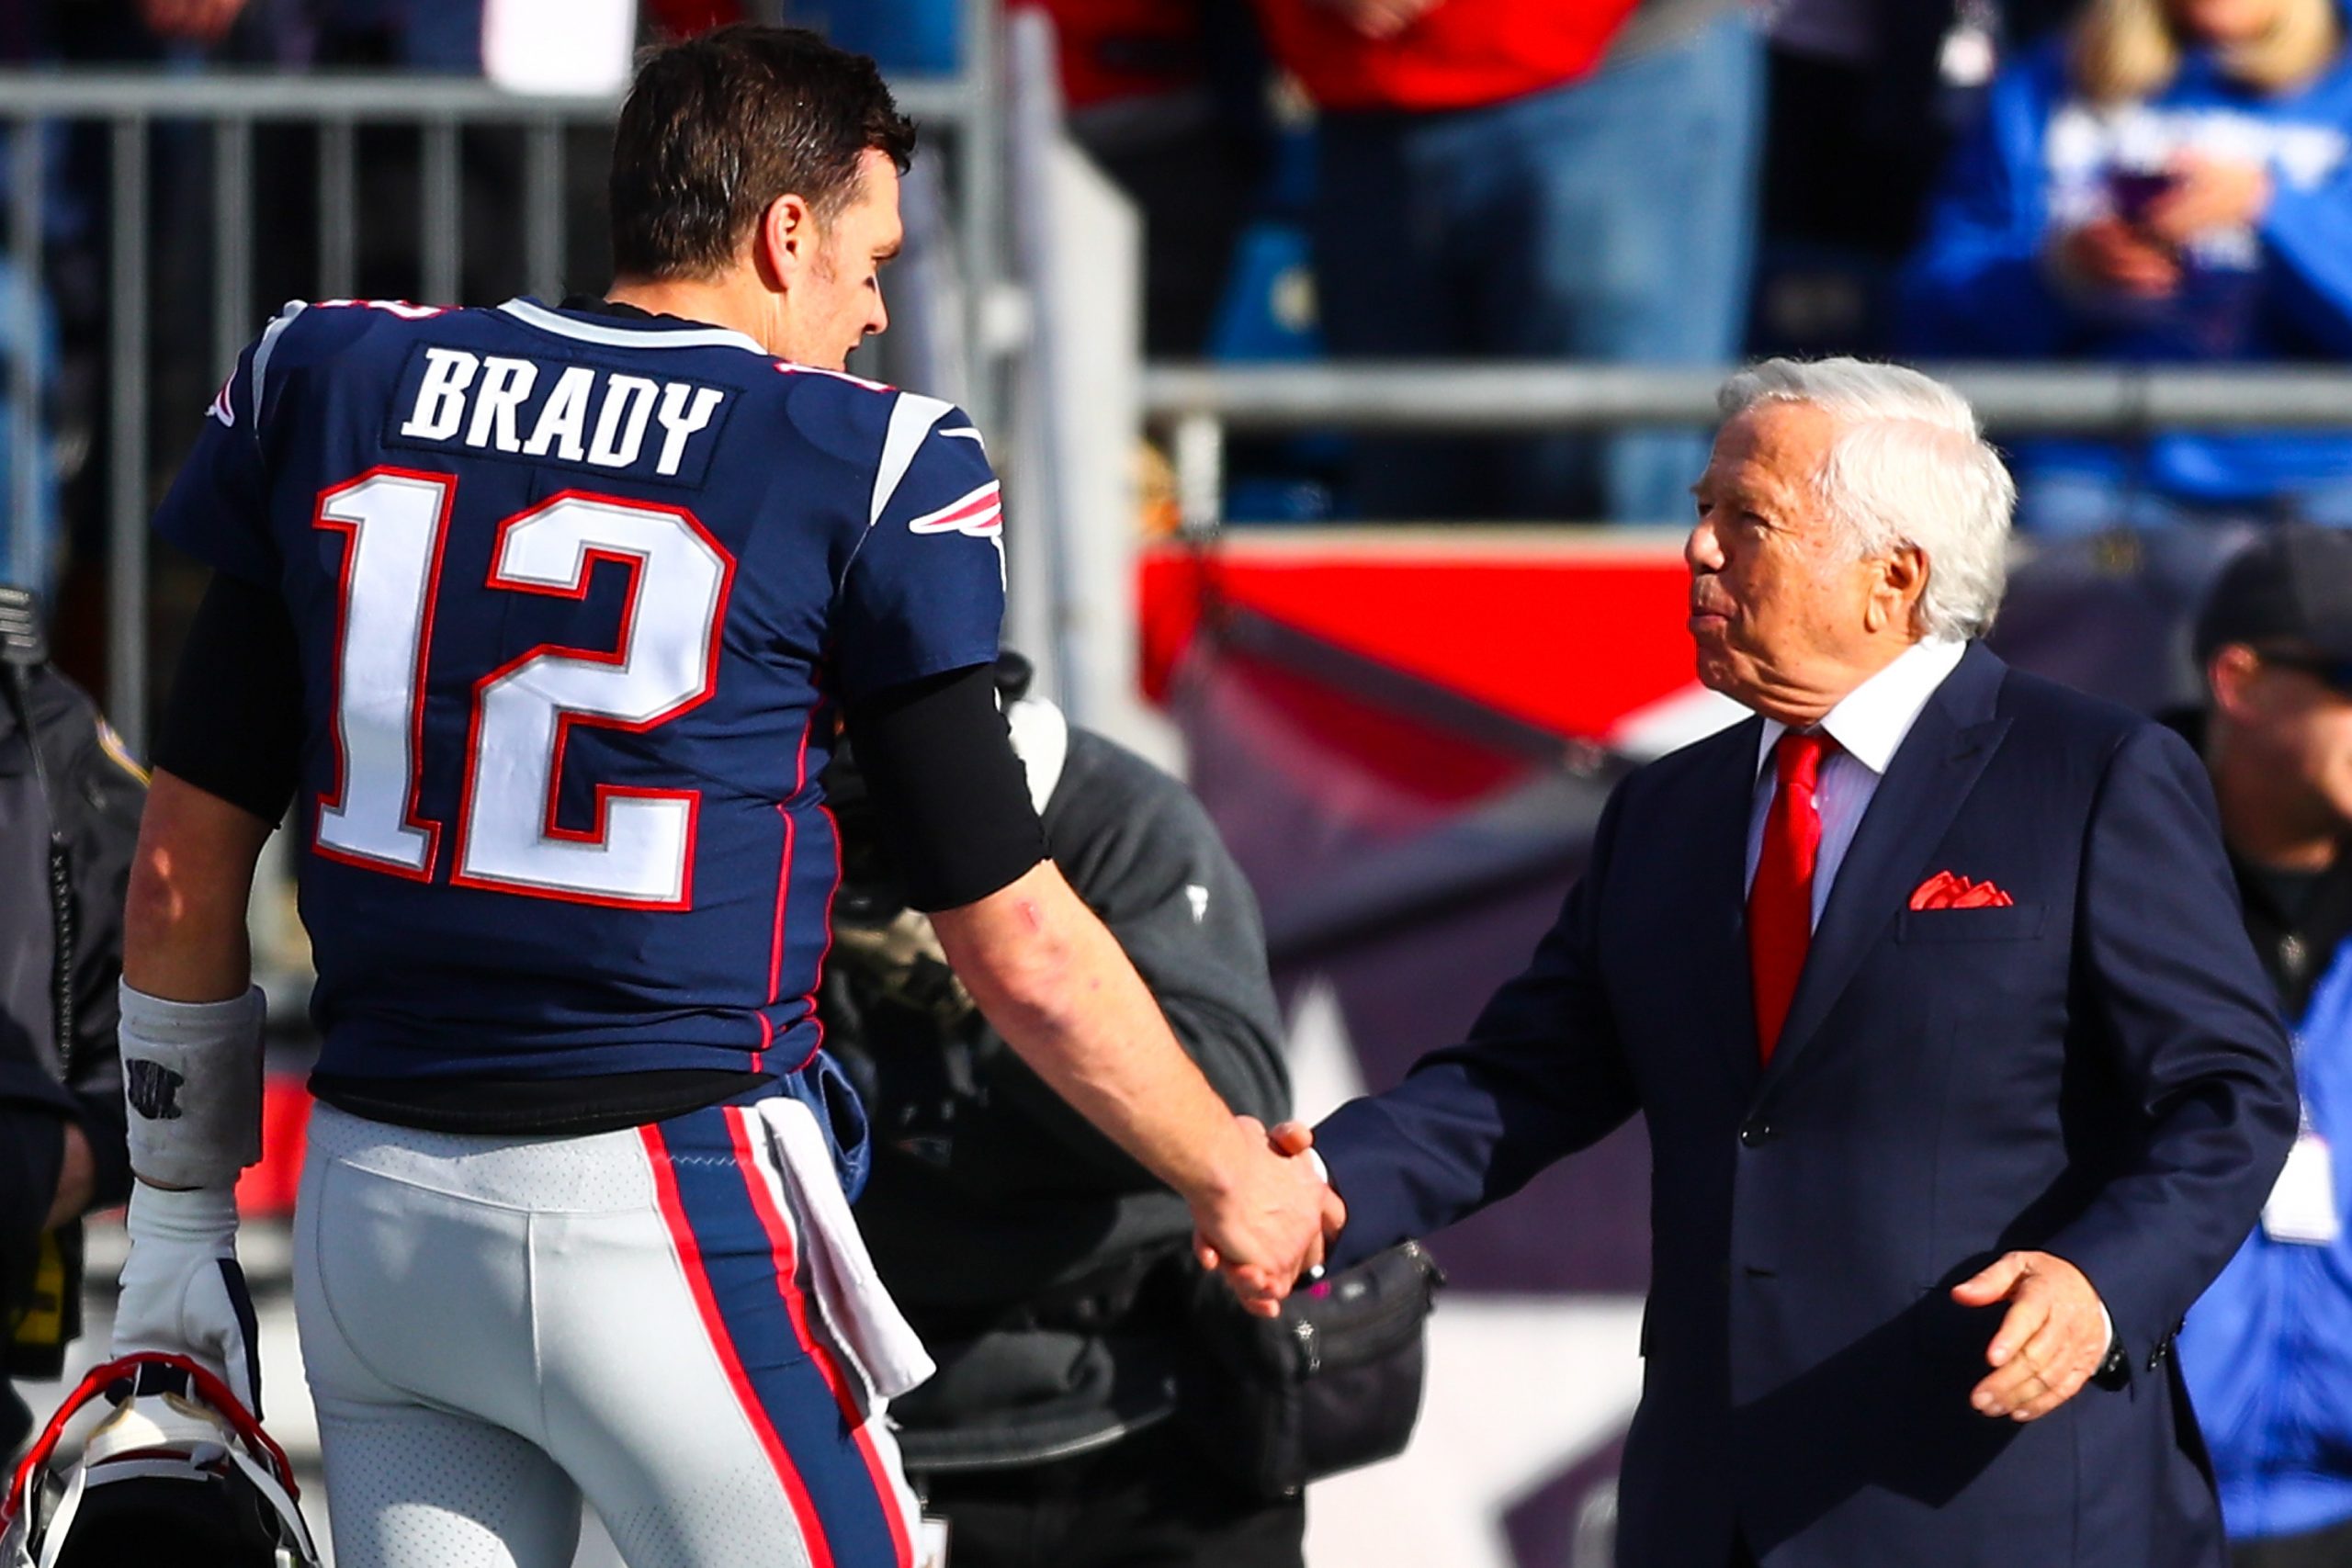 Tom Brady shakes the hand of owner Robert Kraft of the New England Patriots before a game against the Miami Dolphins.